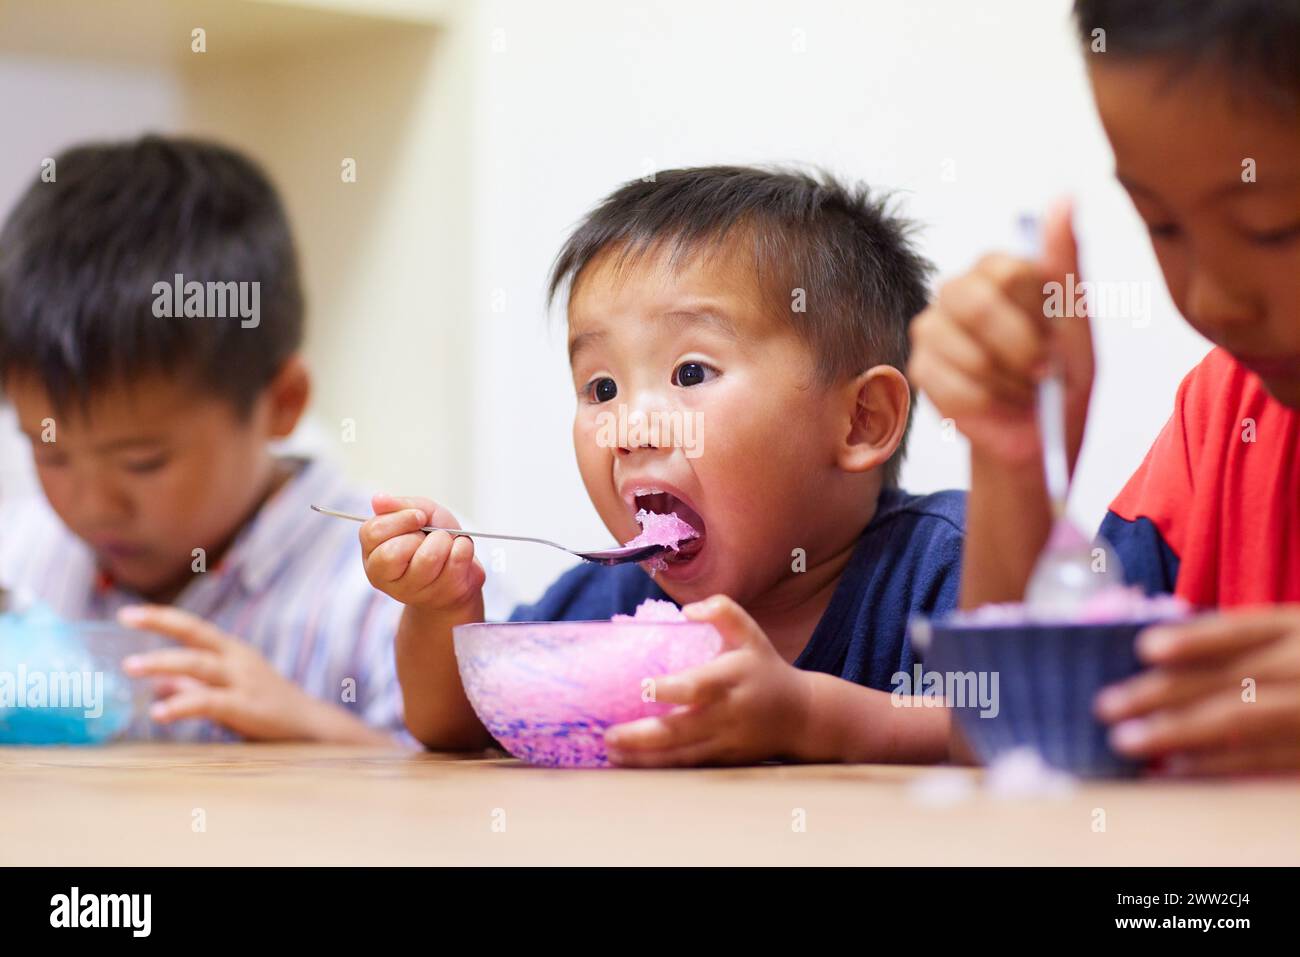 Kids eating shaved ice Stock Photo